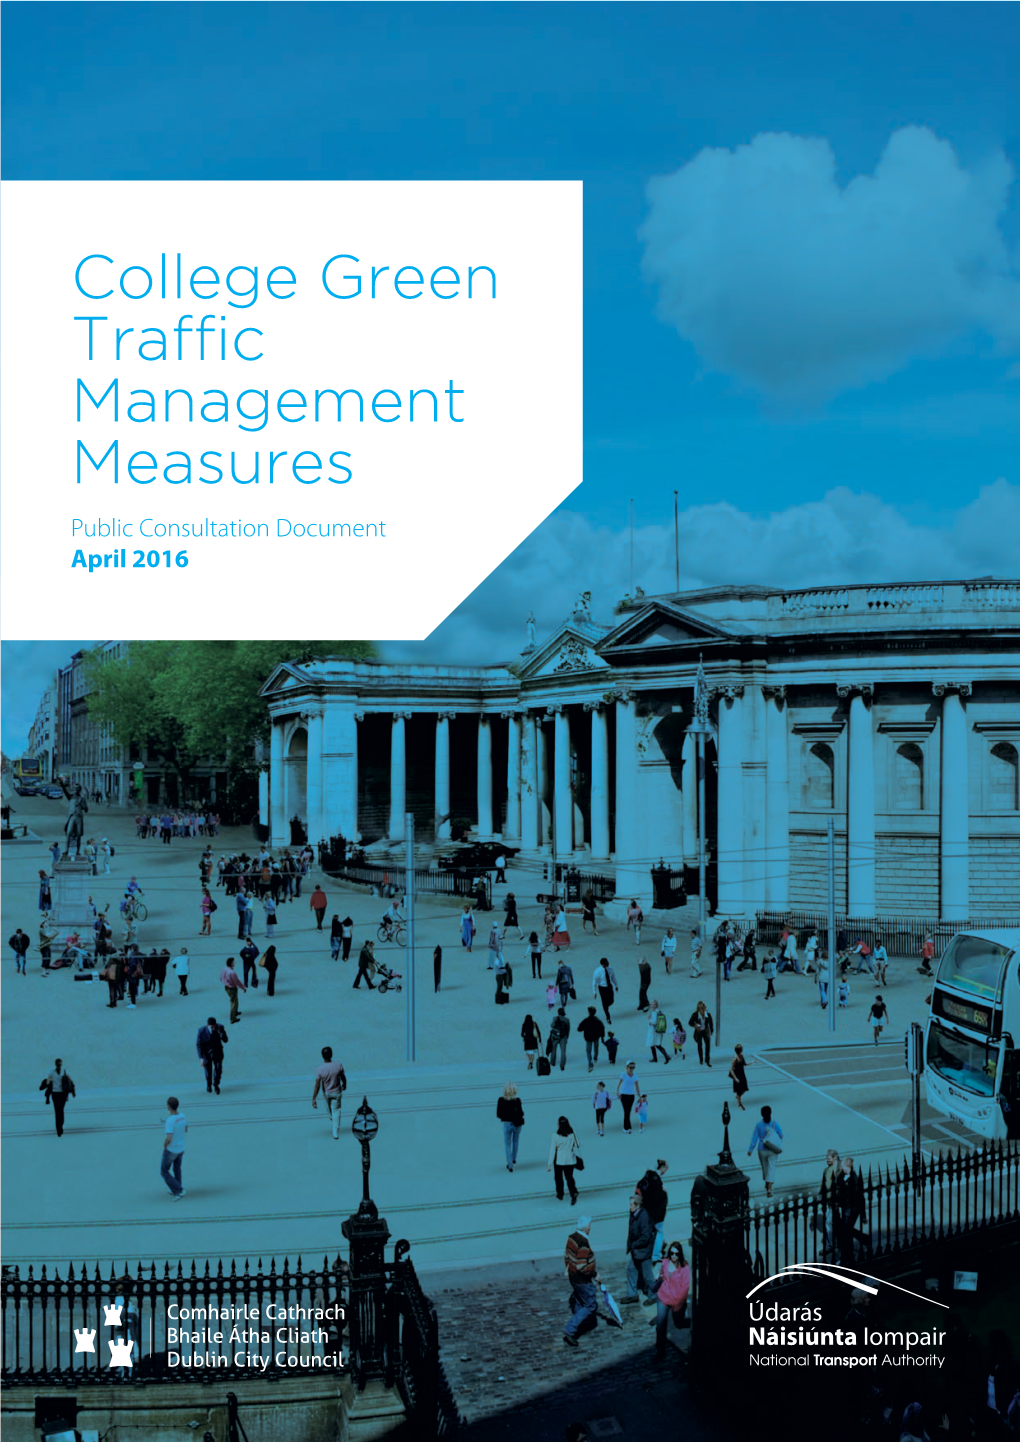 College Green Traffic Management Measures